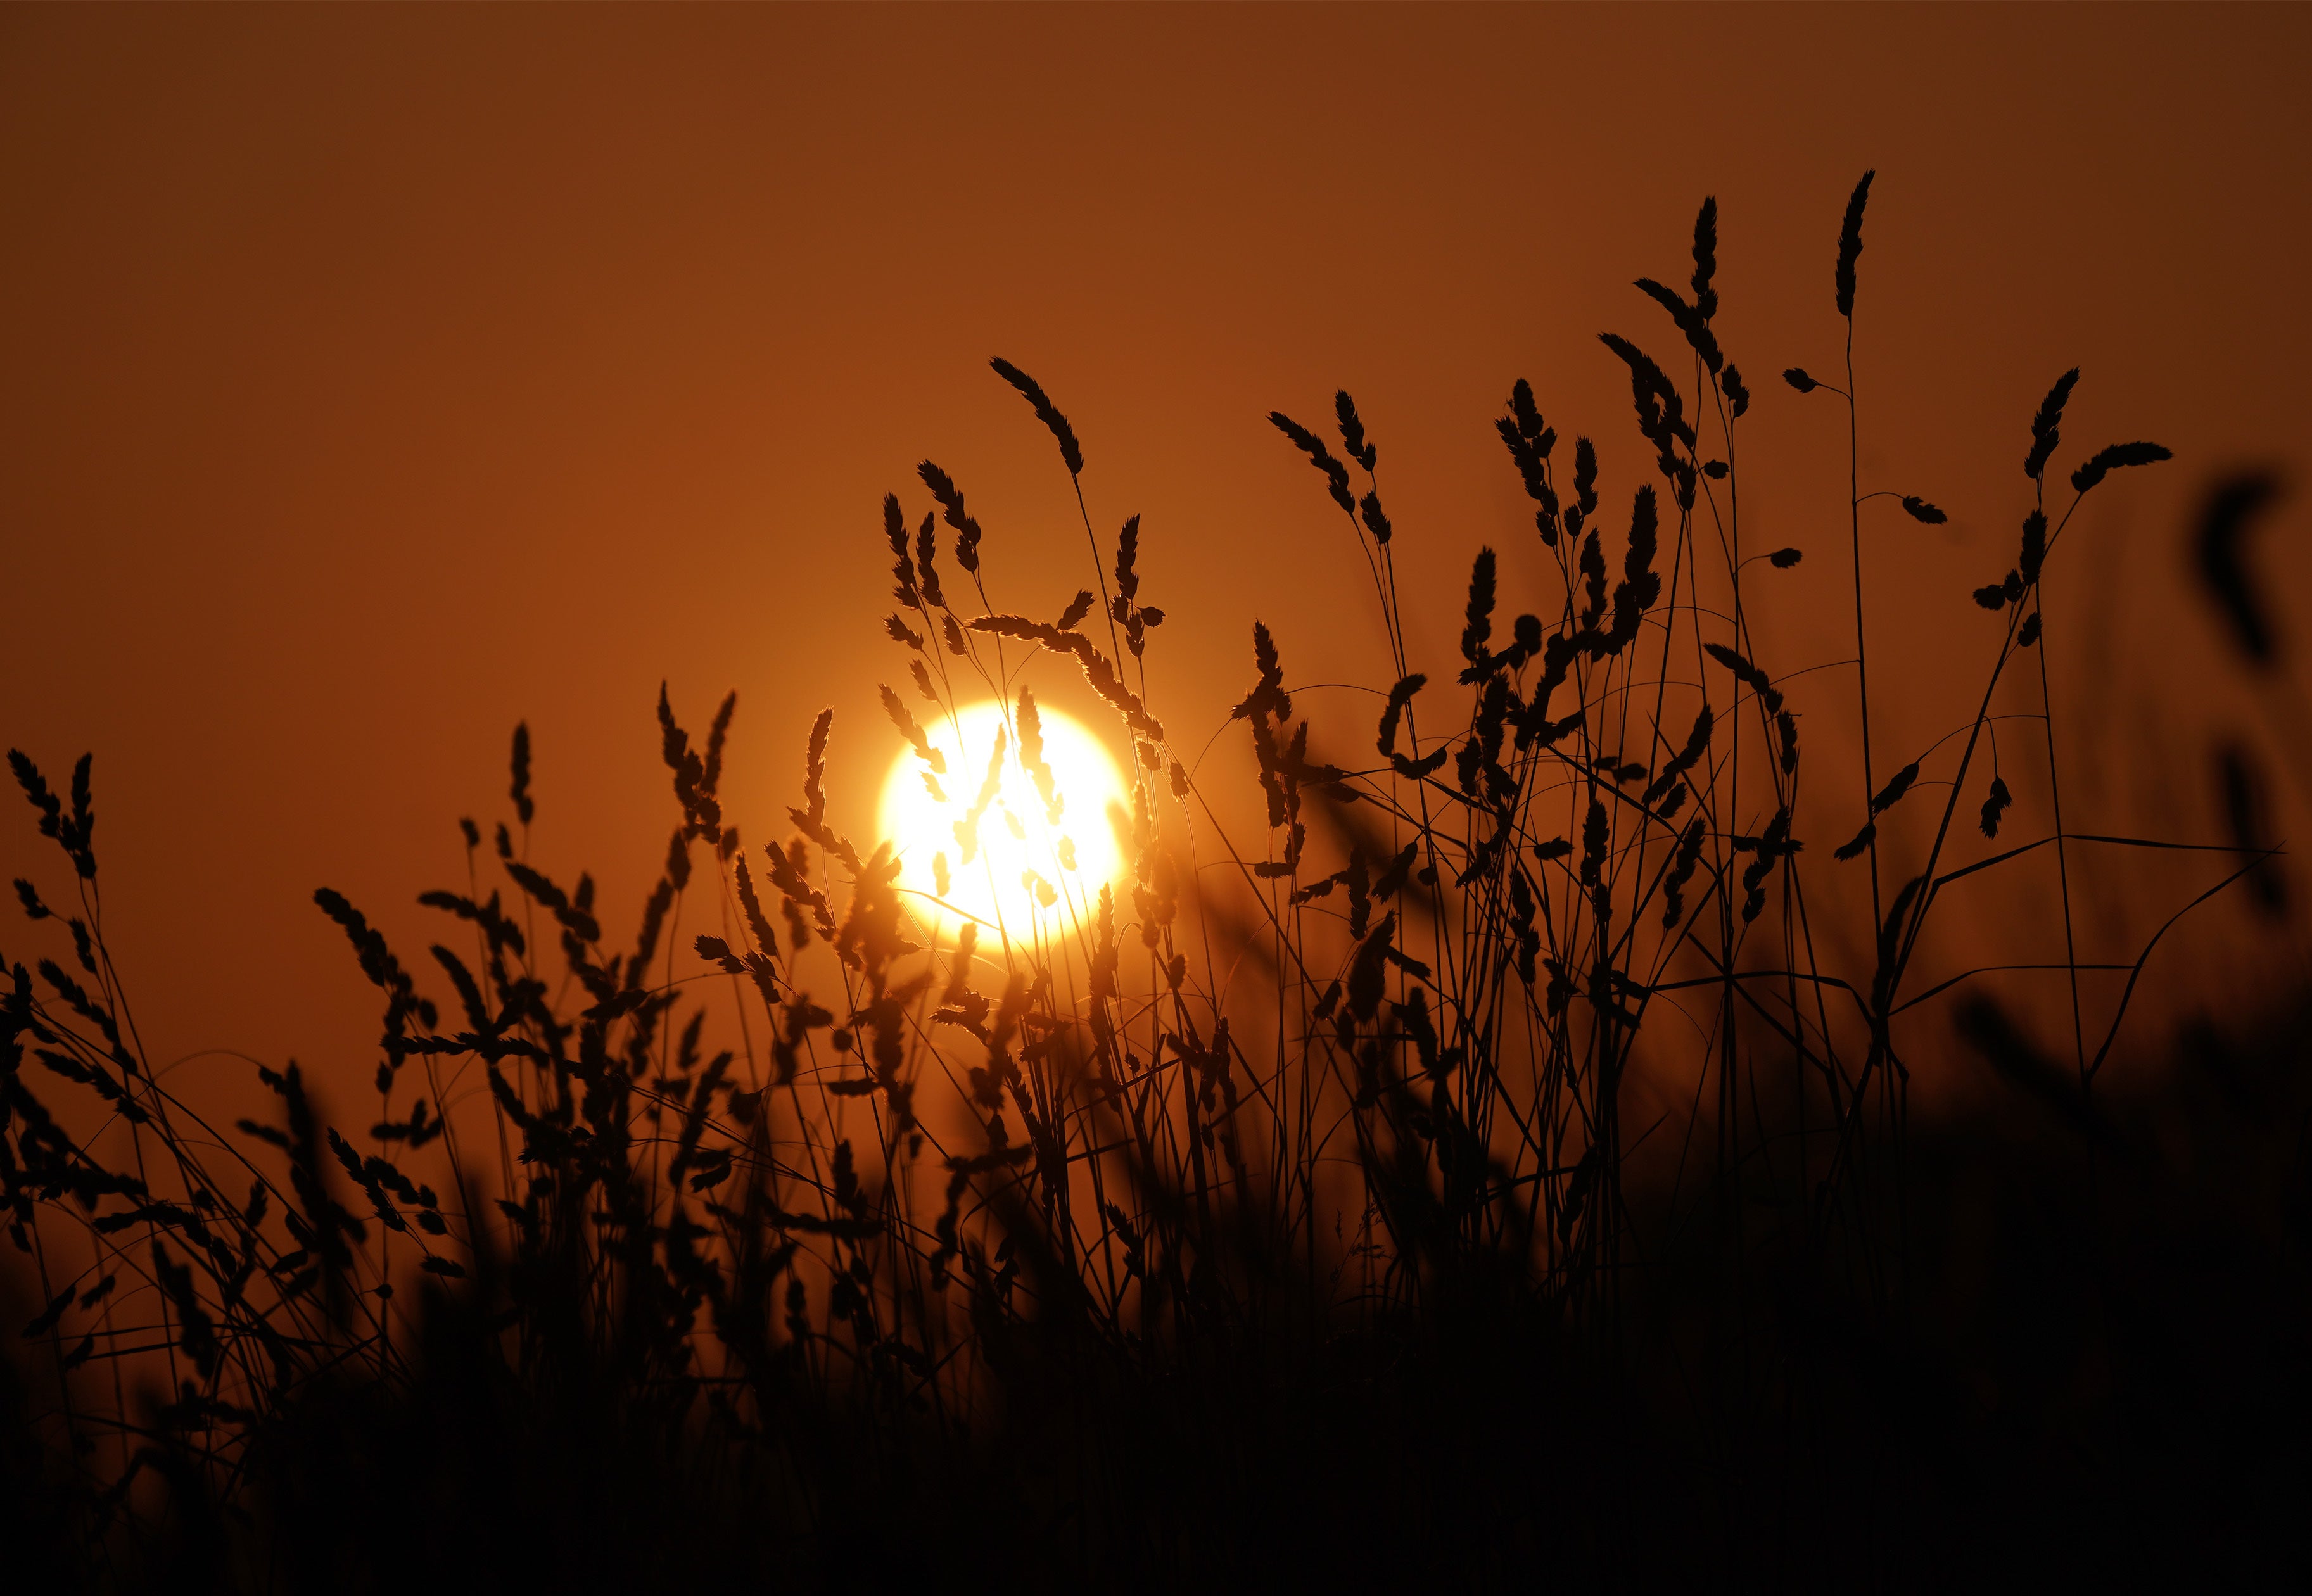 The sun rises on a record-breaking day for UK temperatures (Yui Mok/PA)